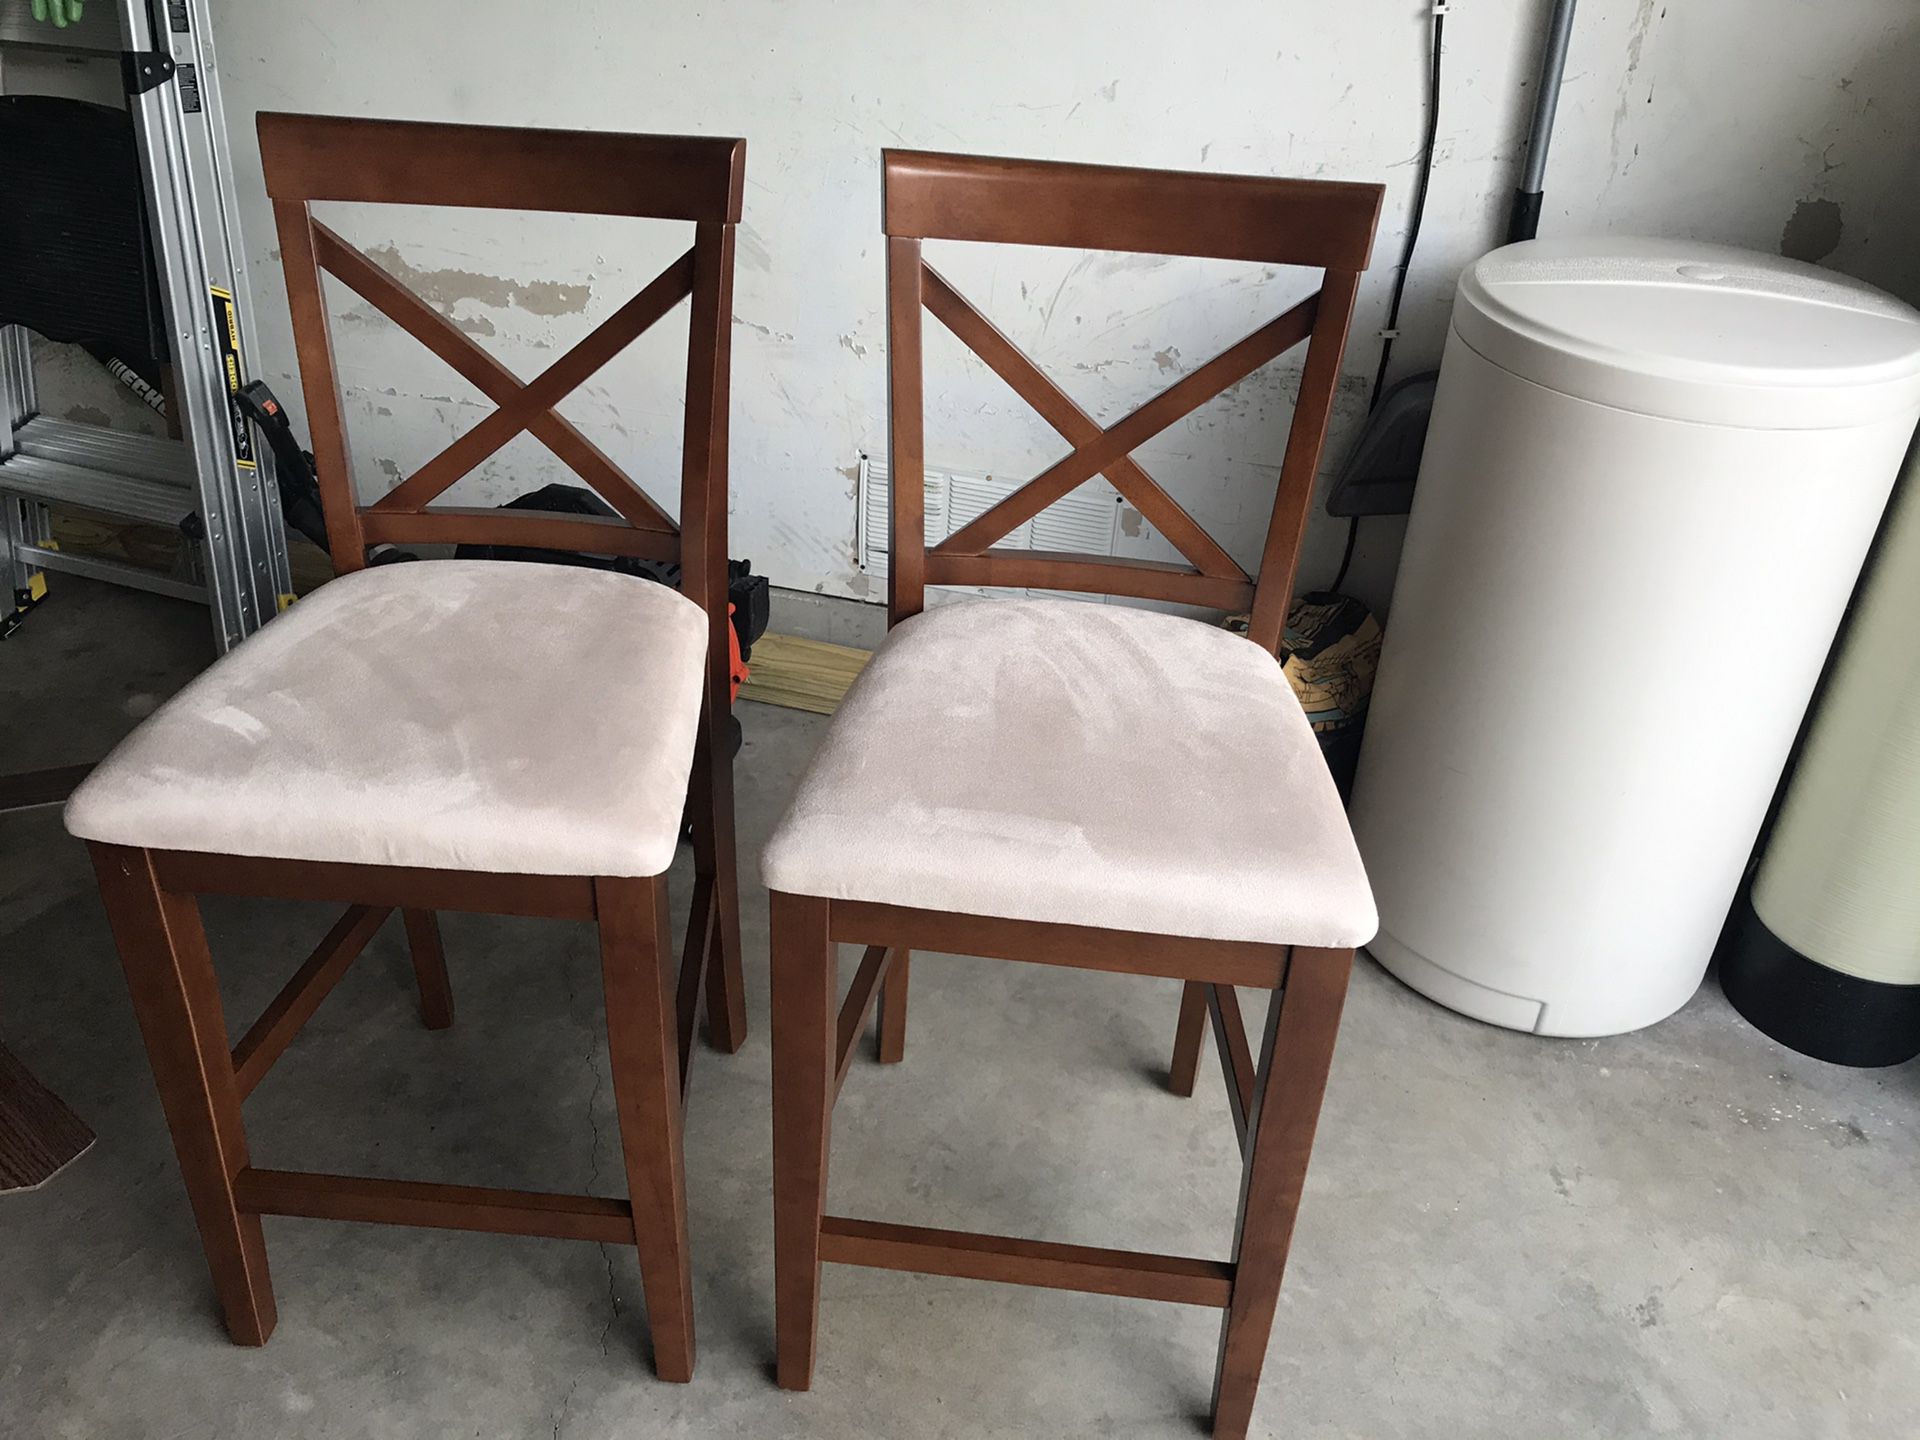 Chairs (stools)